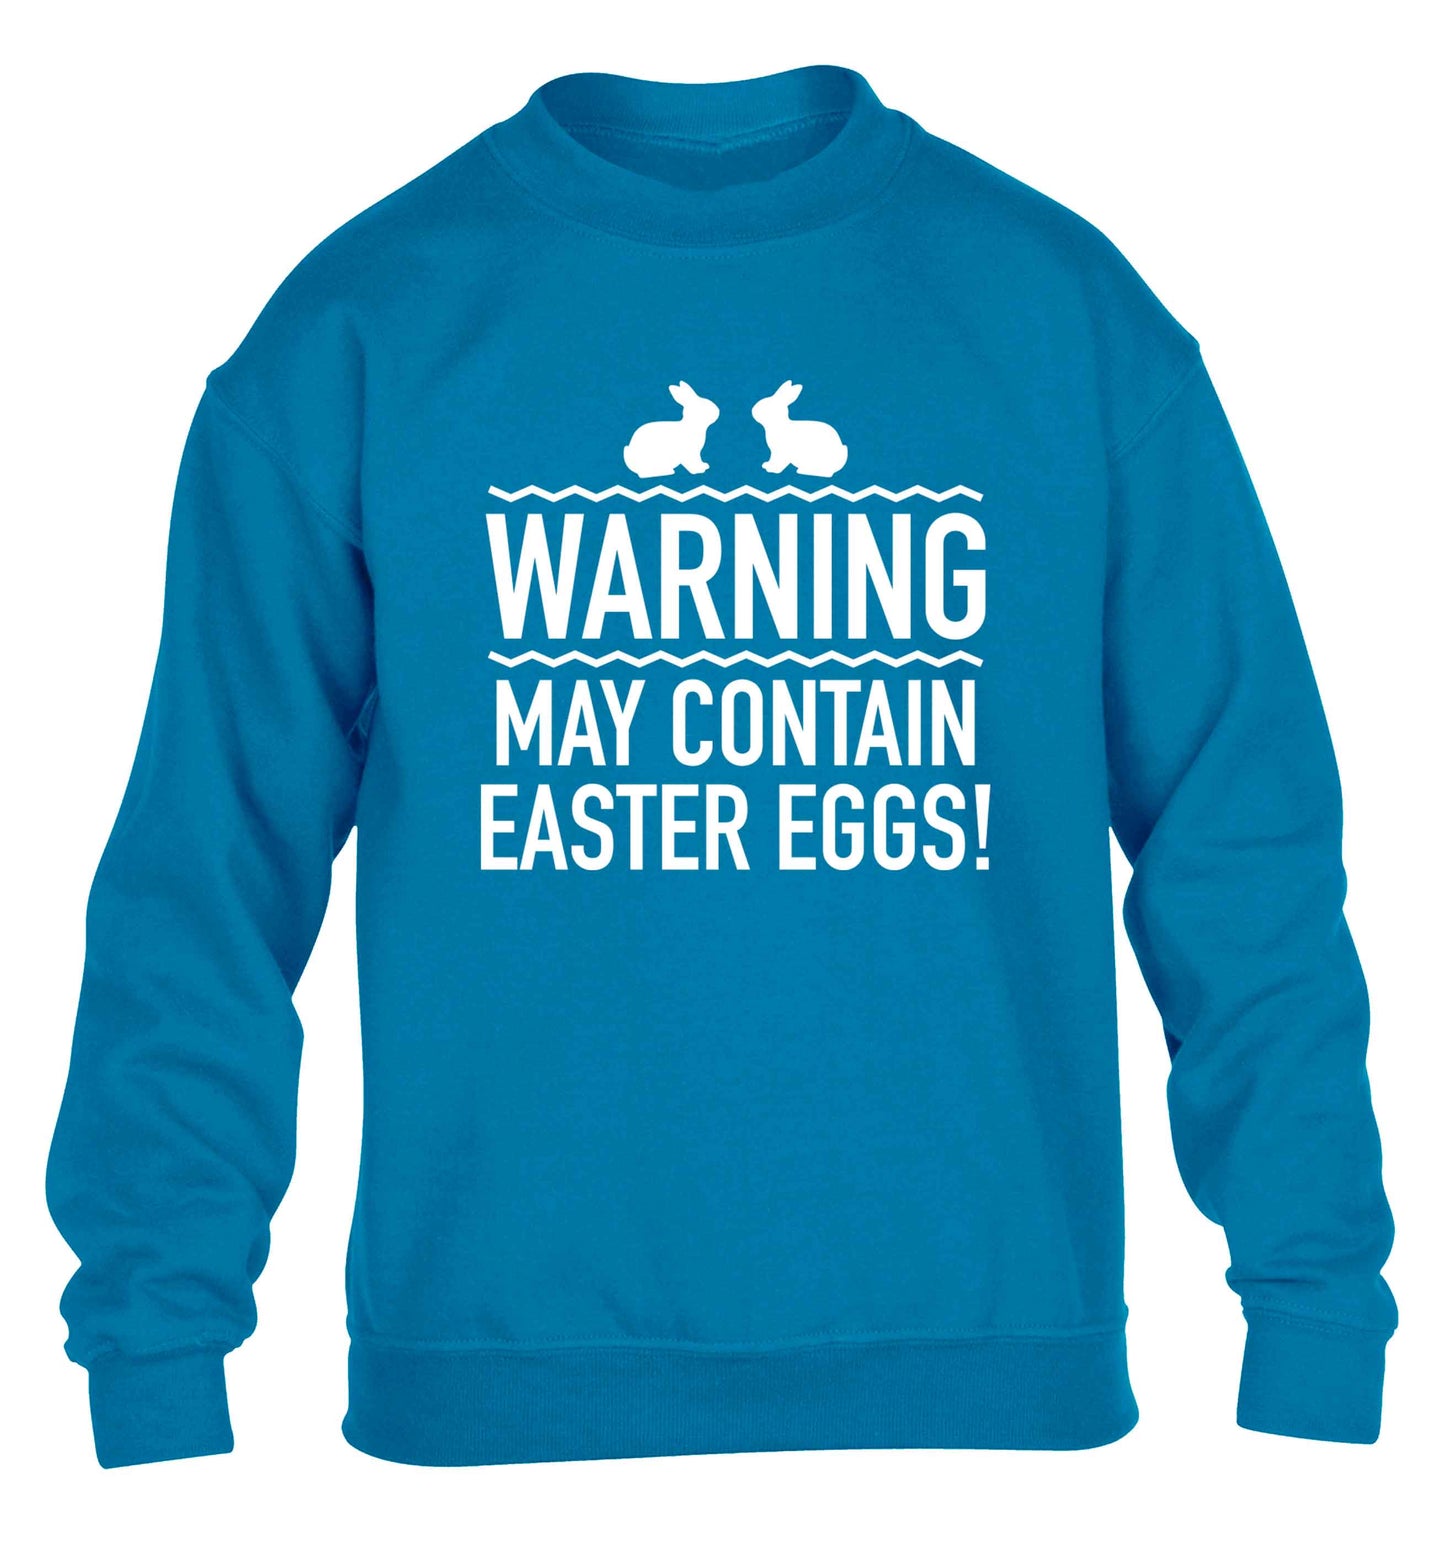 Warning may contain Easter eggs children's blue sweater 12-13 Years